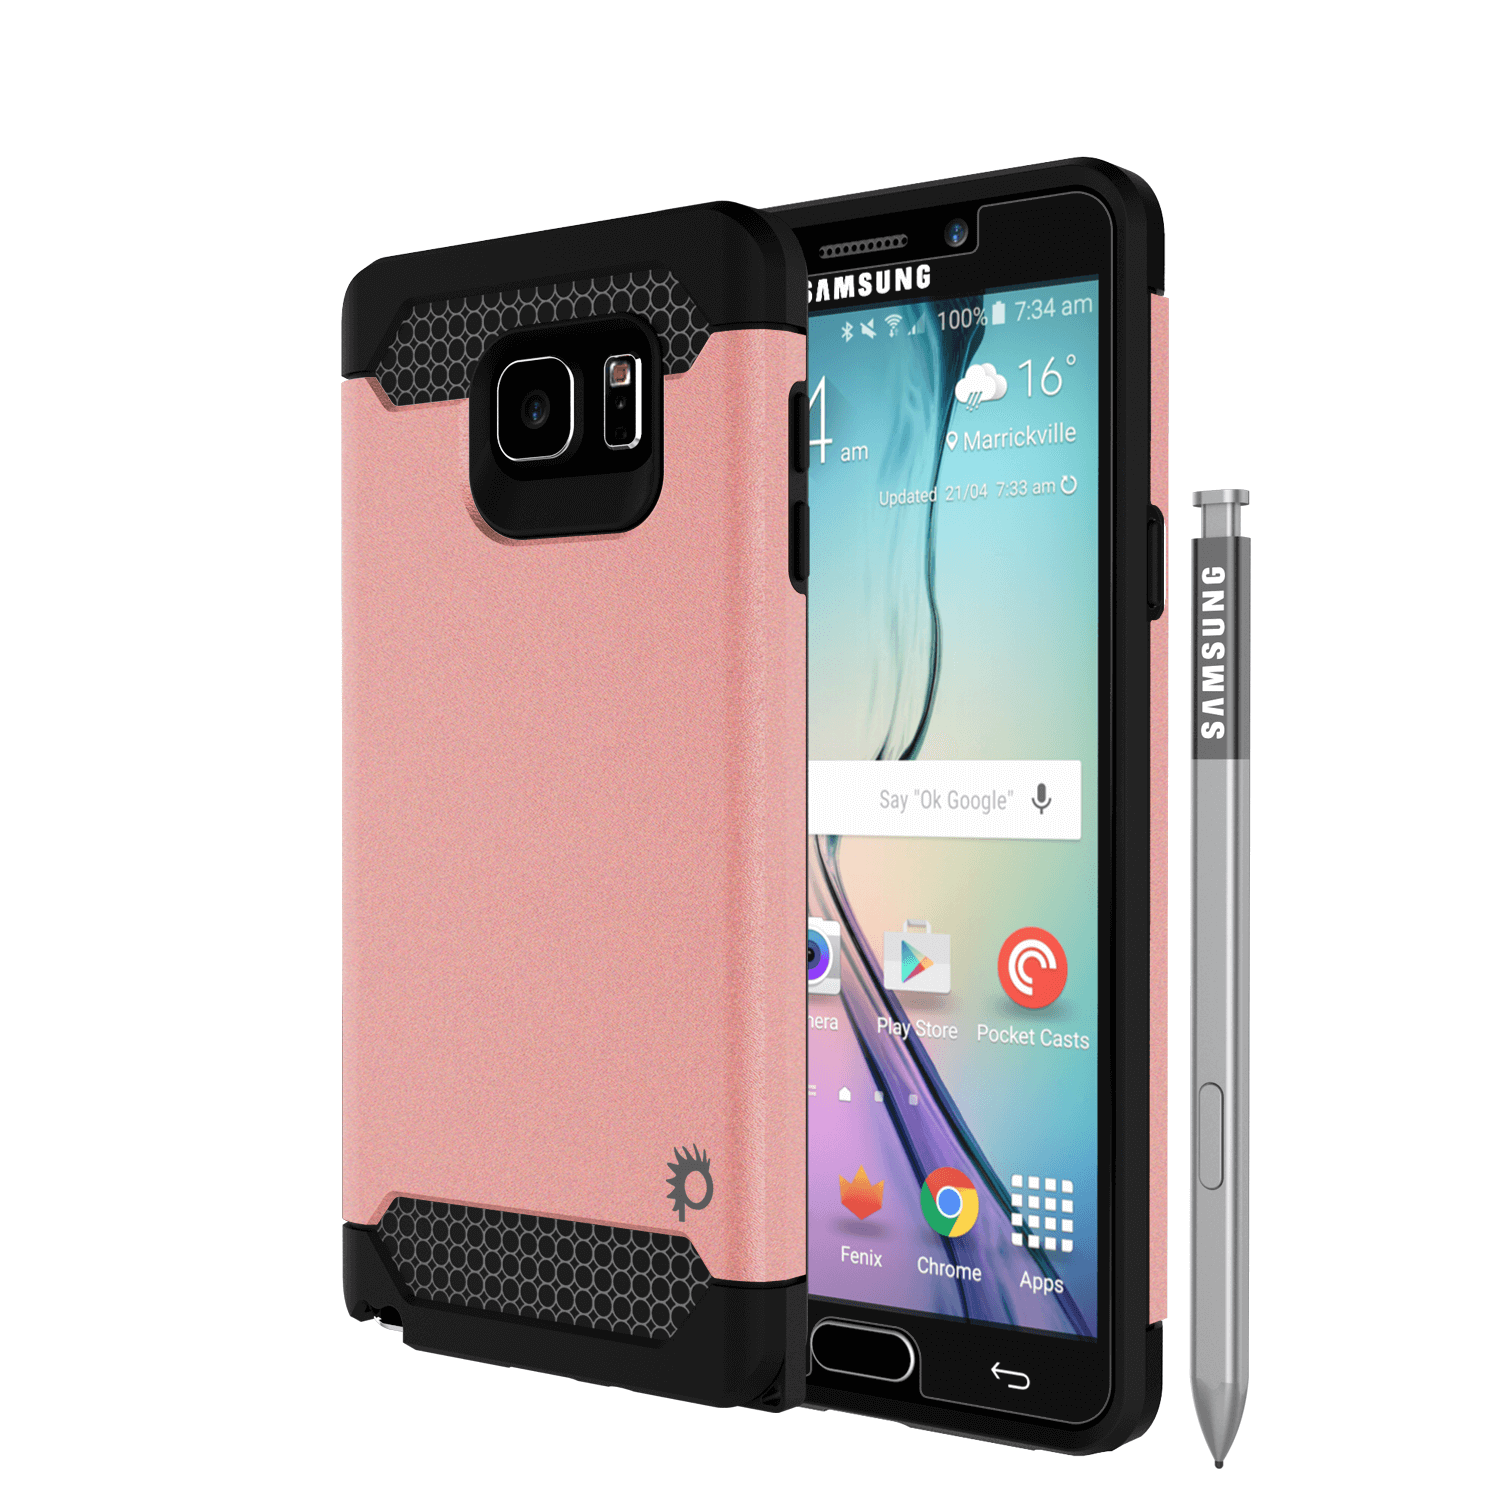 Galaxy Note 5 Case PunkCase Galactic Rose Gold Slim Armor Soft Cover Case w/ Tempered Glass